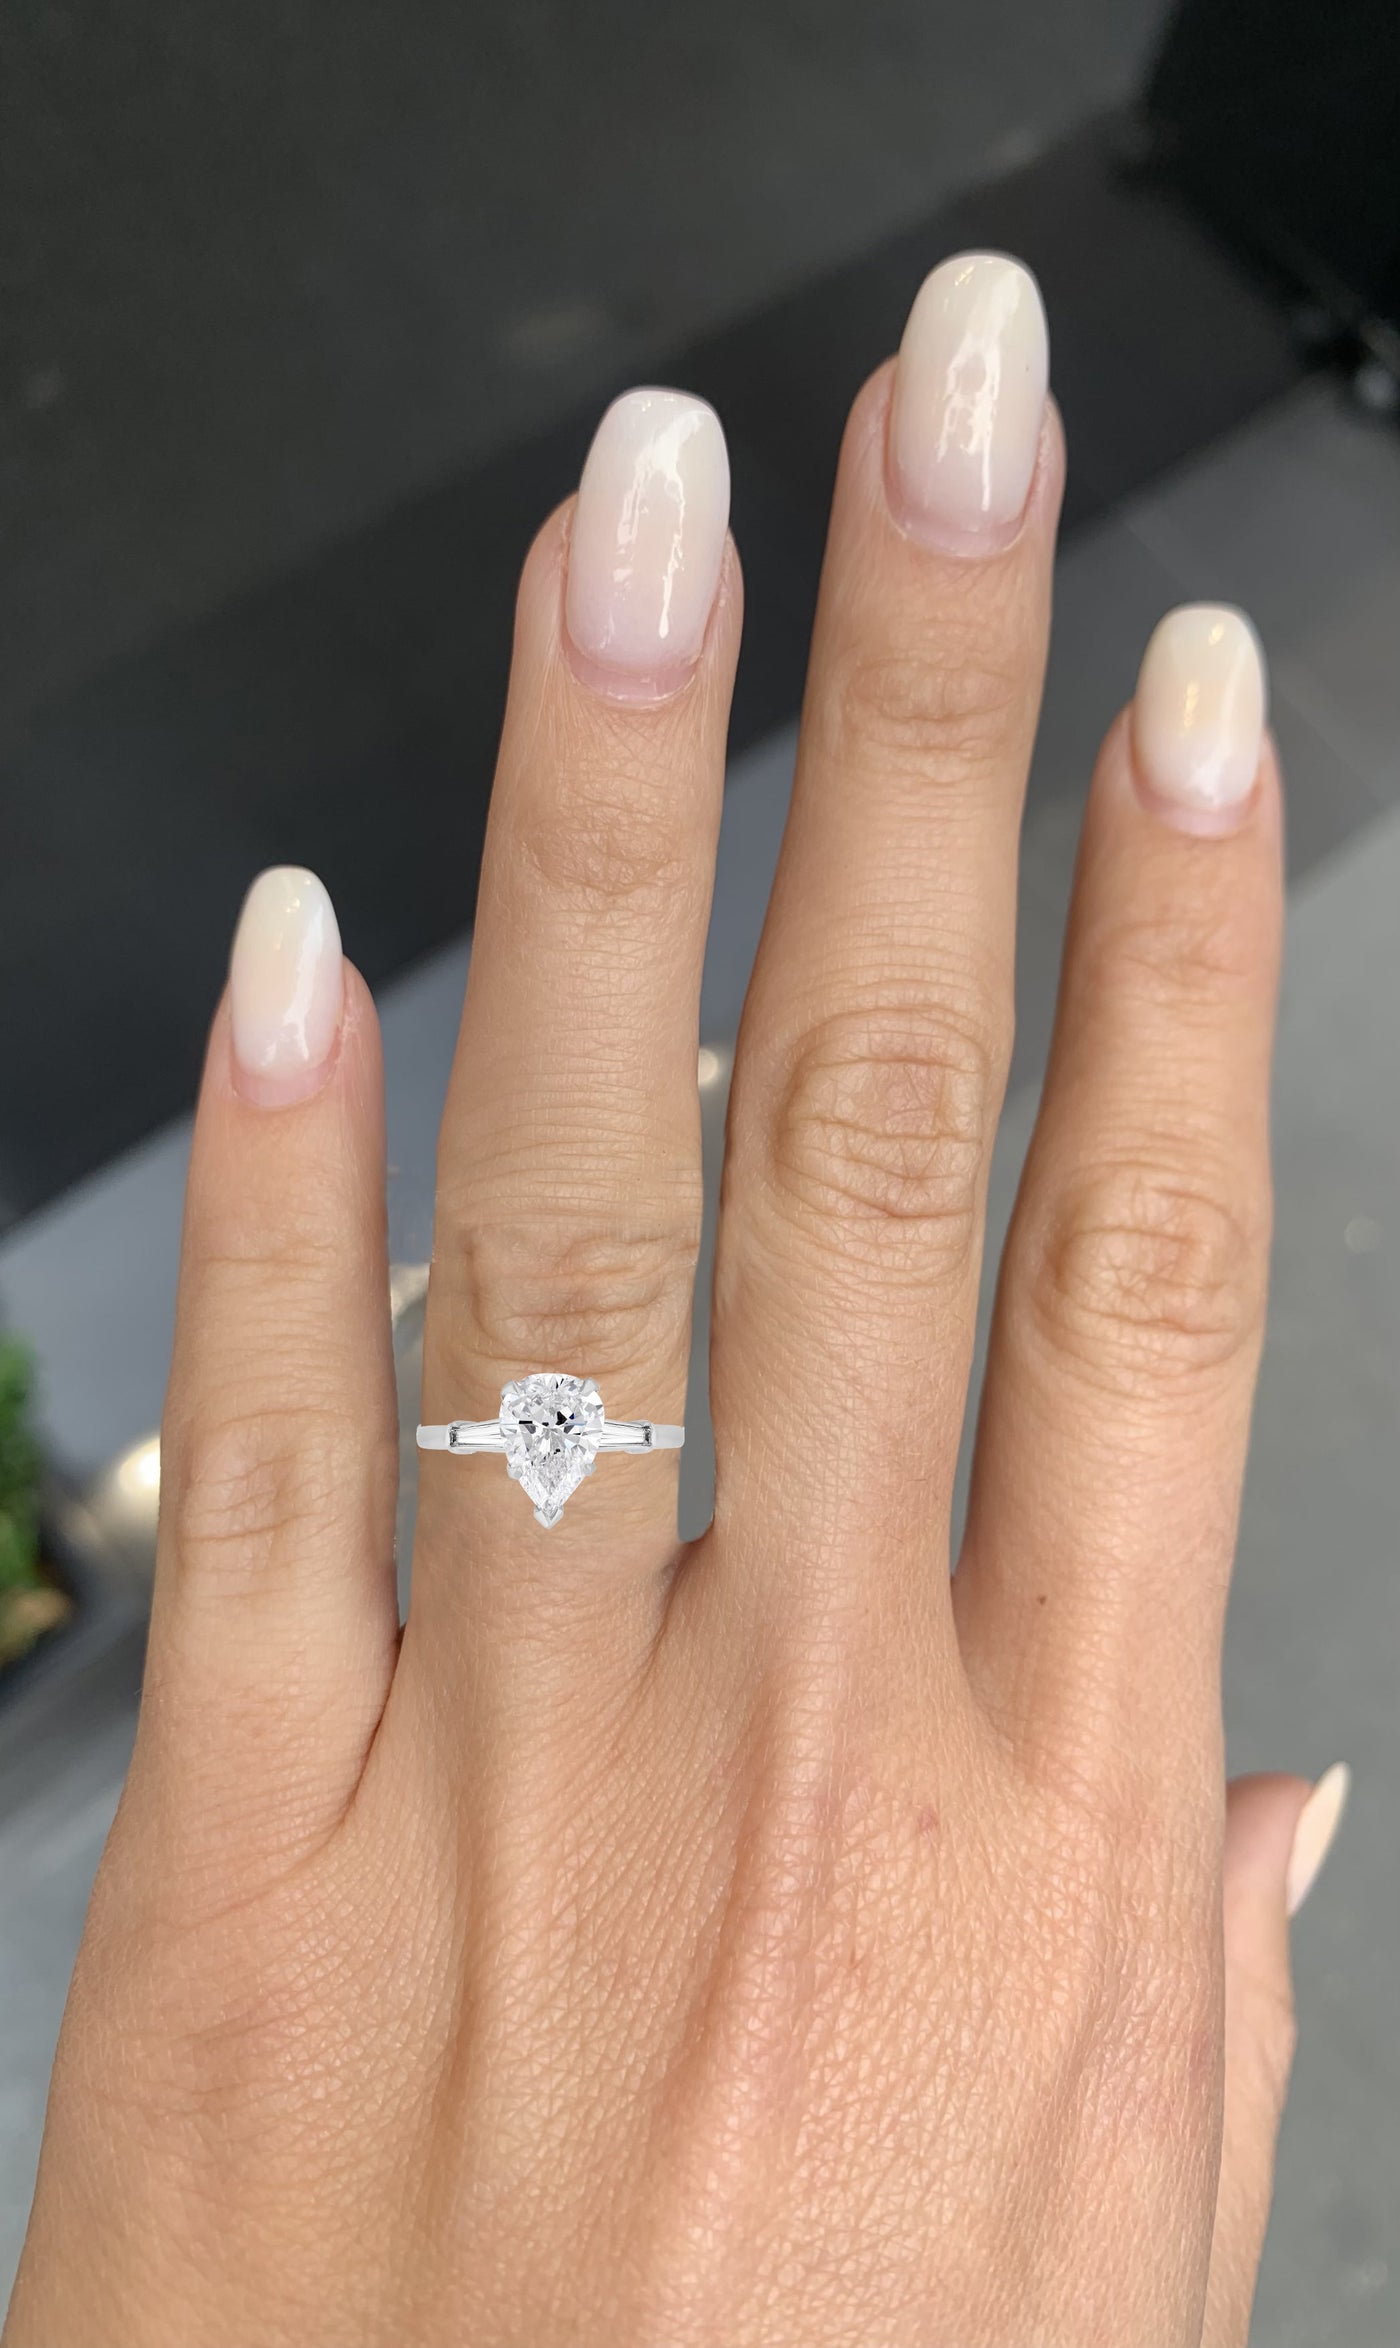 Pear Shaped Diamond with Tapered Baguette Engagement Ring